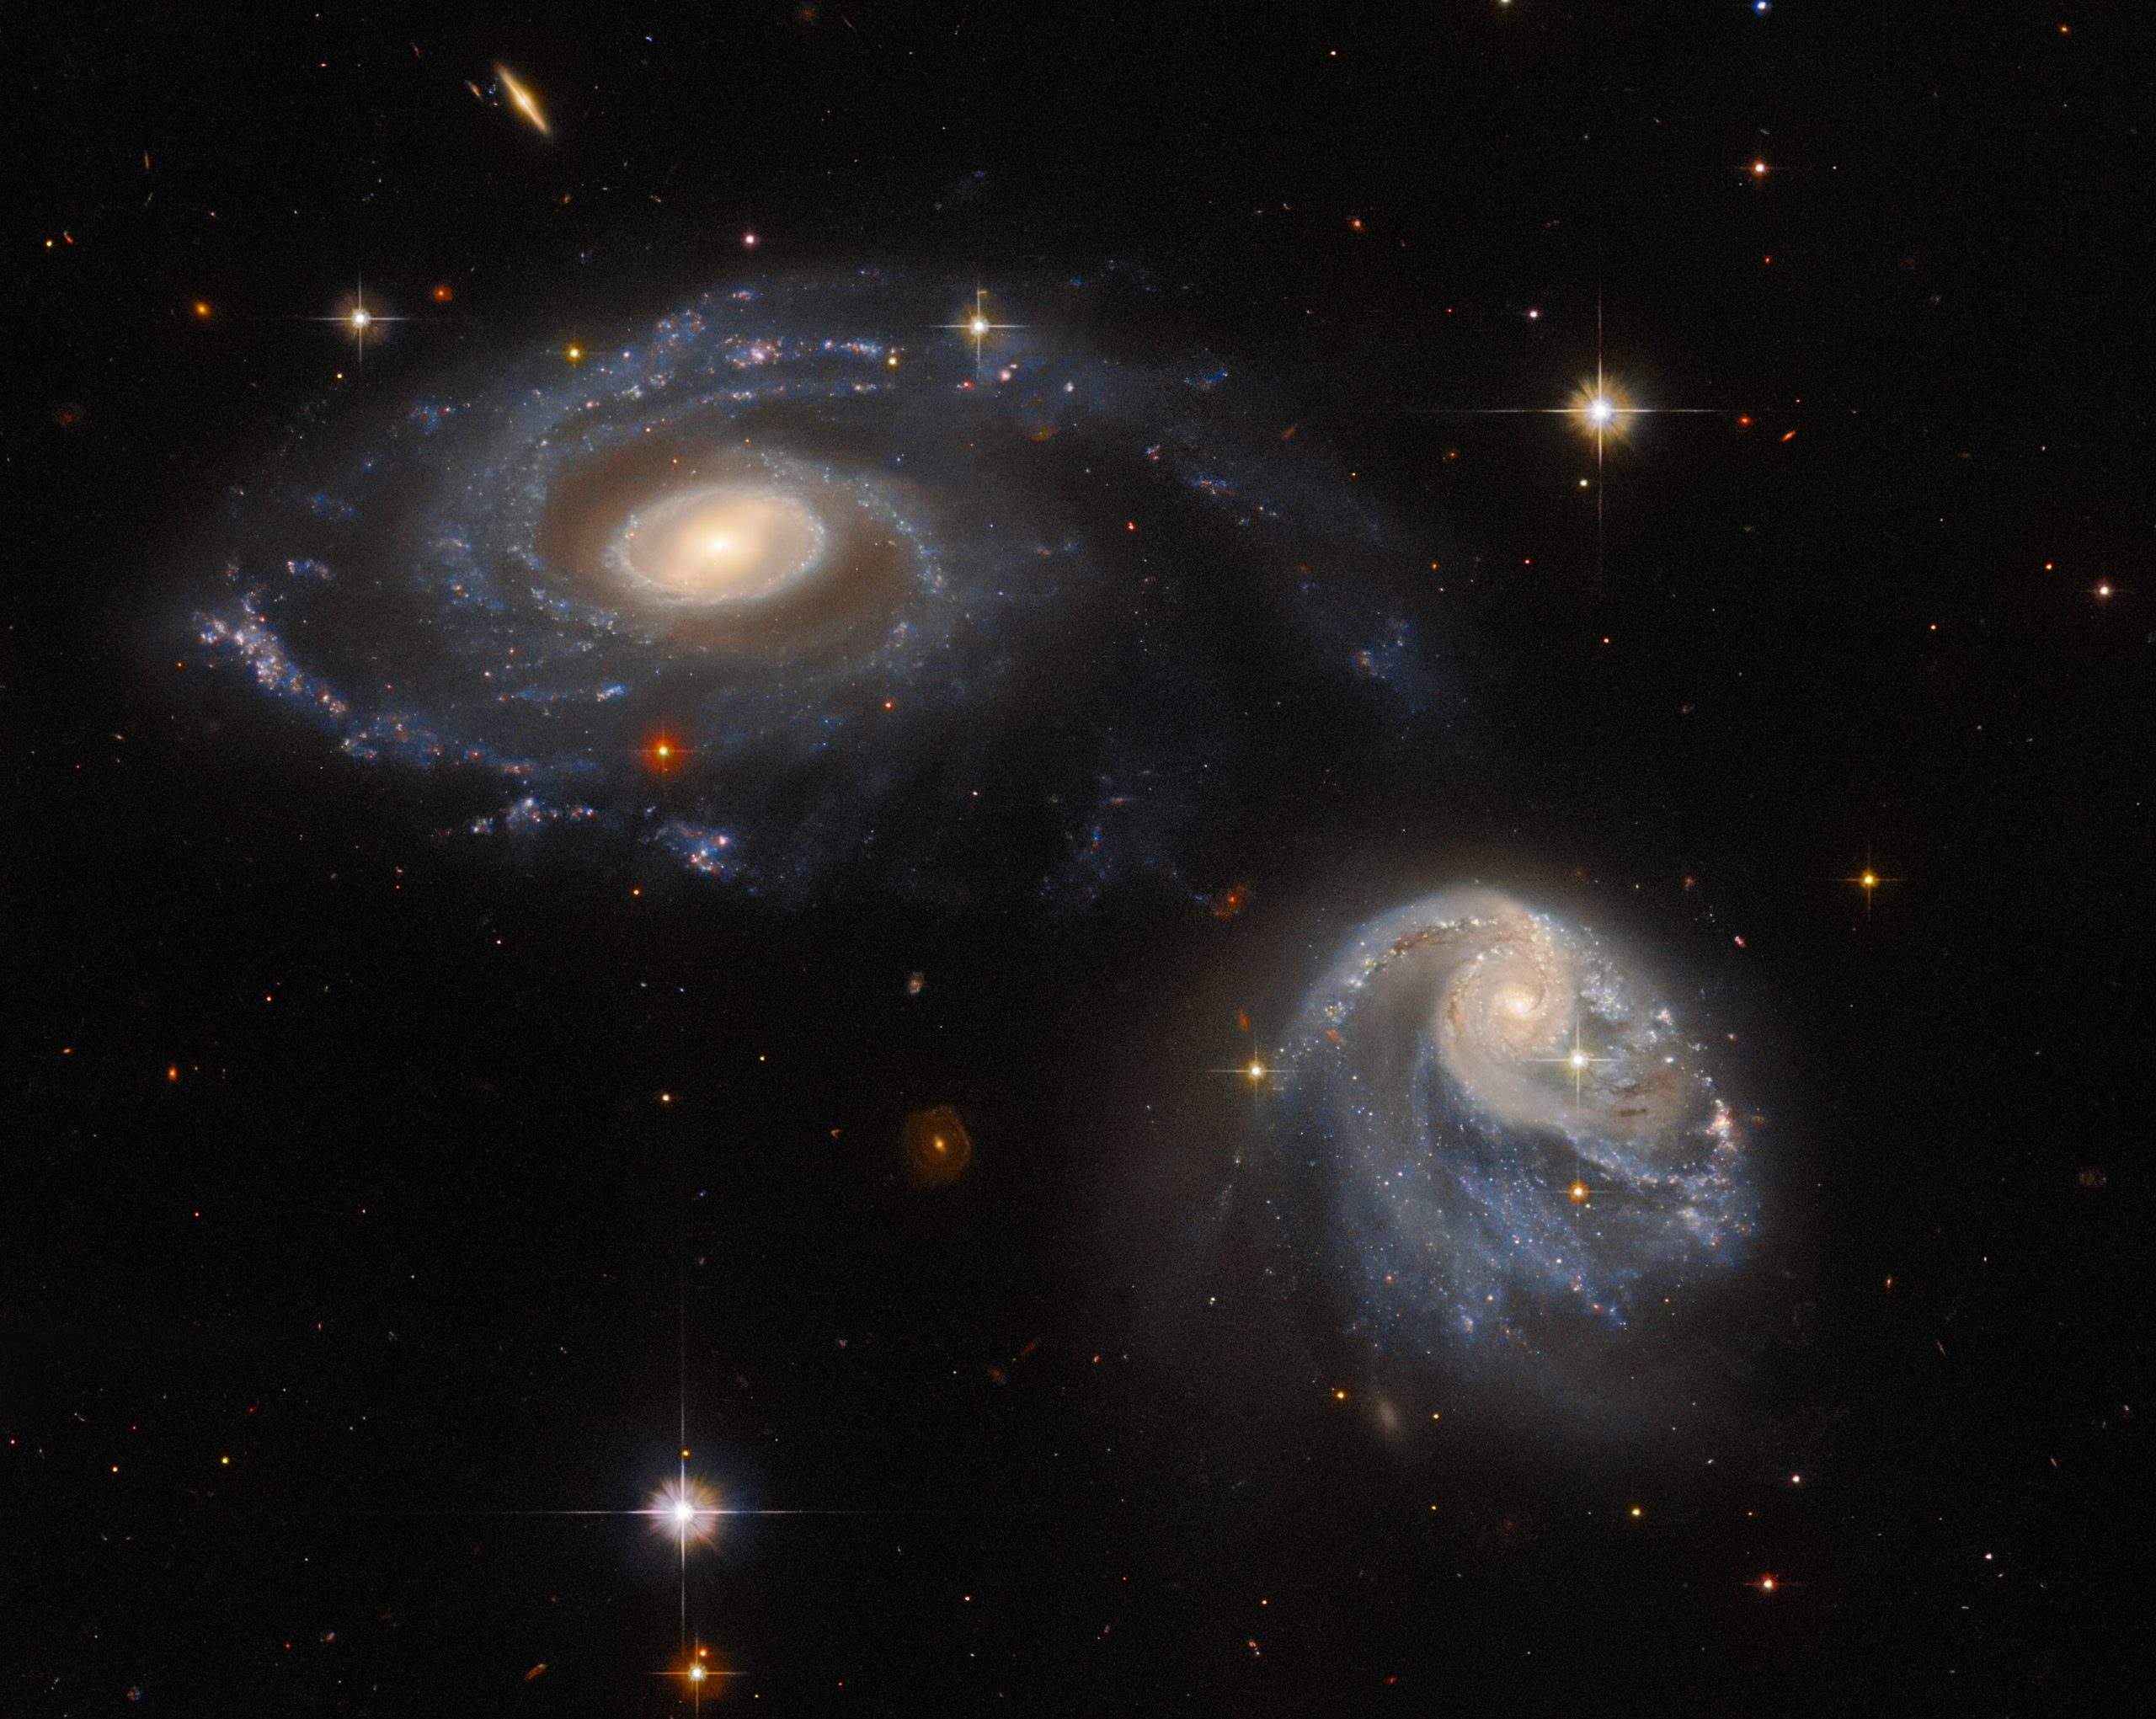 The two interacting galaxies known as Arp-Madore 608-33. Image Credit: ESA/Hubble & NASA, Dark Energy Survey/Department of Energy/Fermilab/Dark Energy Camera (DECam)/Cerro Tololo Inter-American Observatory/NOIRLab/AURA.